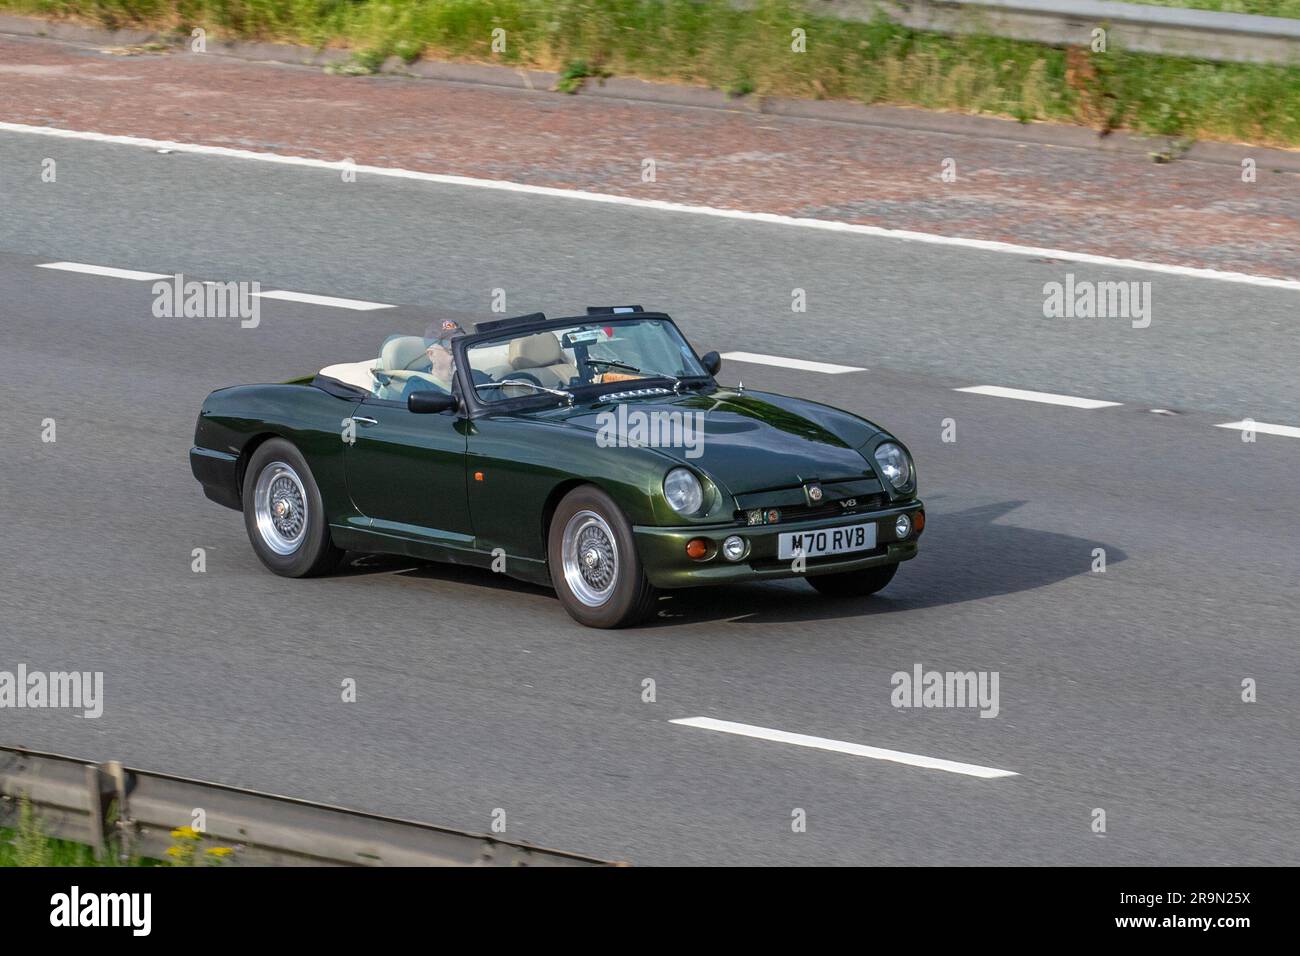 1994 90s nineties Woodcote green MG RV8 V8 British sports Car Rover V8 engine 4000 cc; travelling at speed on the M6 motorway in Greater Manchester, UK Stock Photo